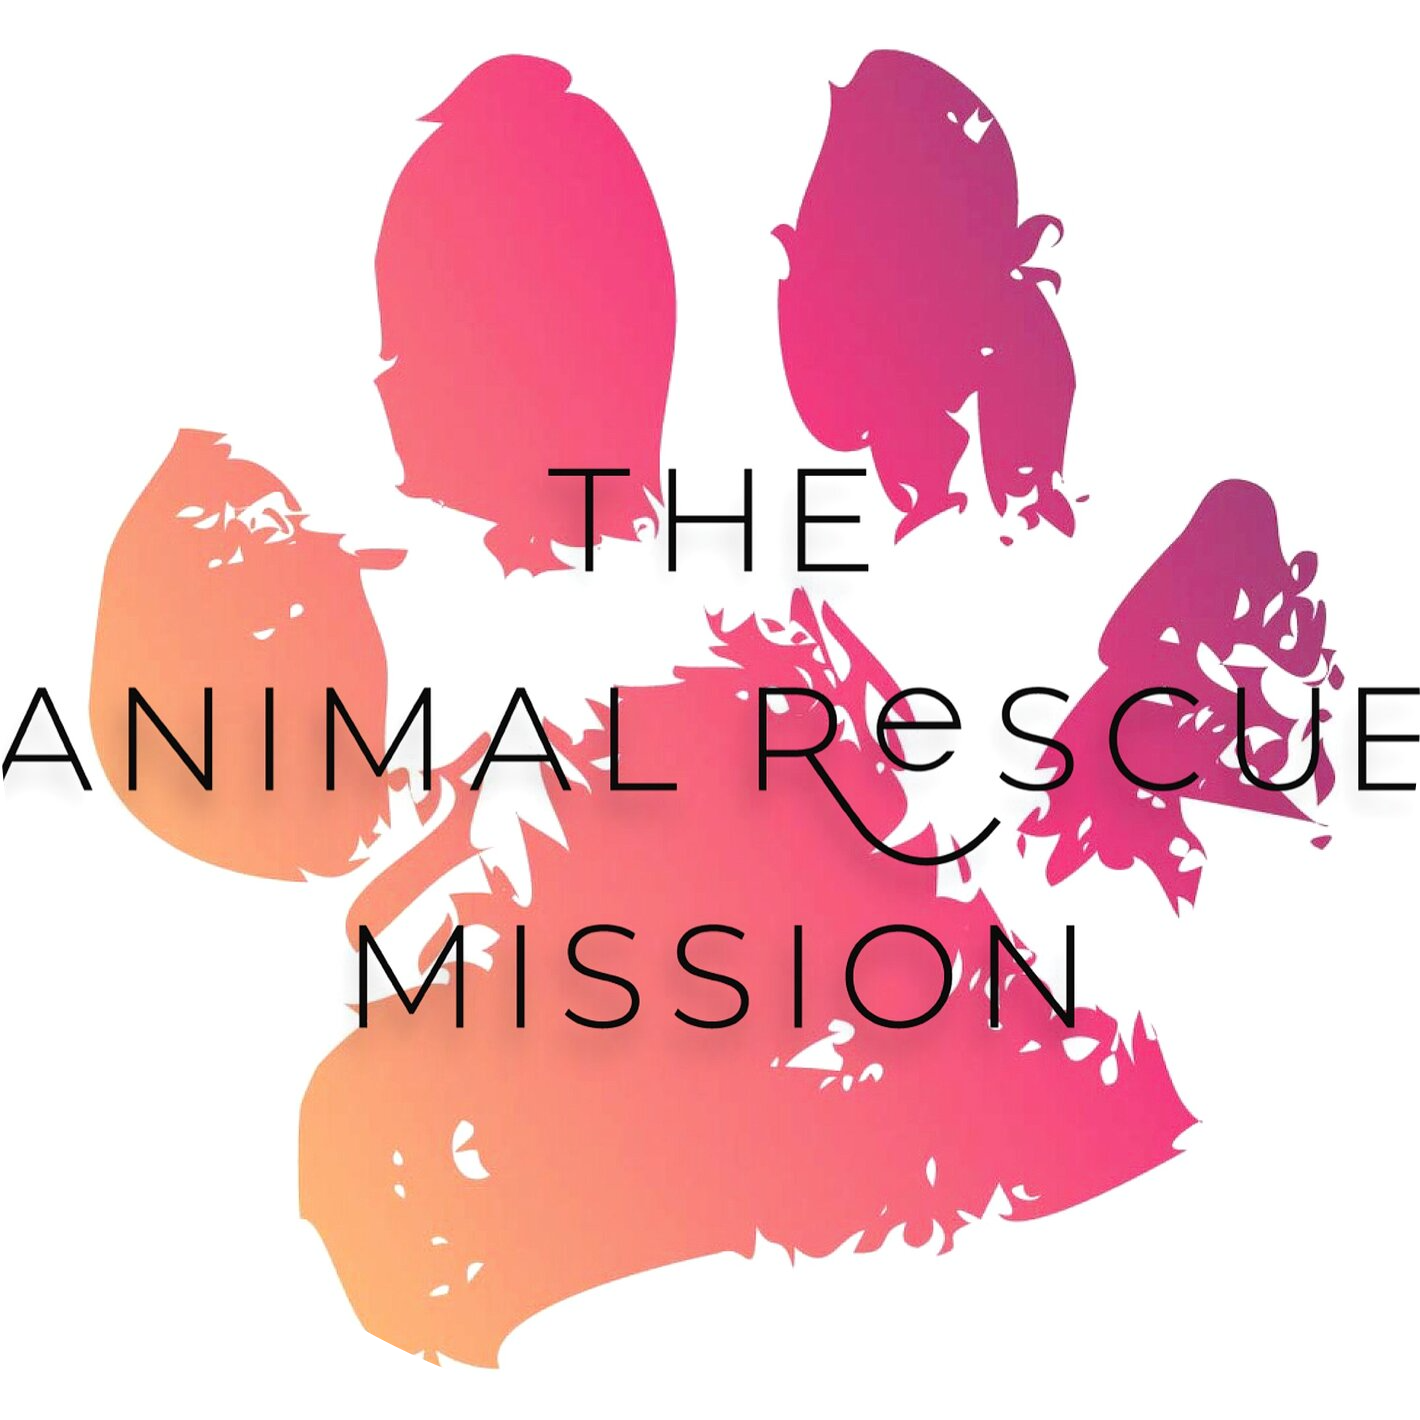 Donate to The Animal Rescue Mission The Animal Rescue Mission